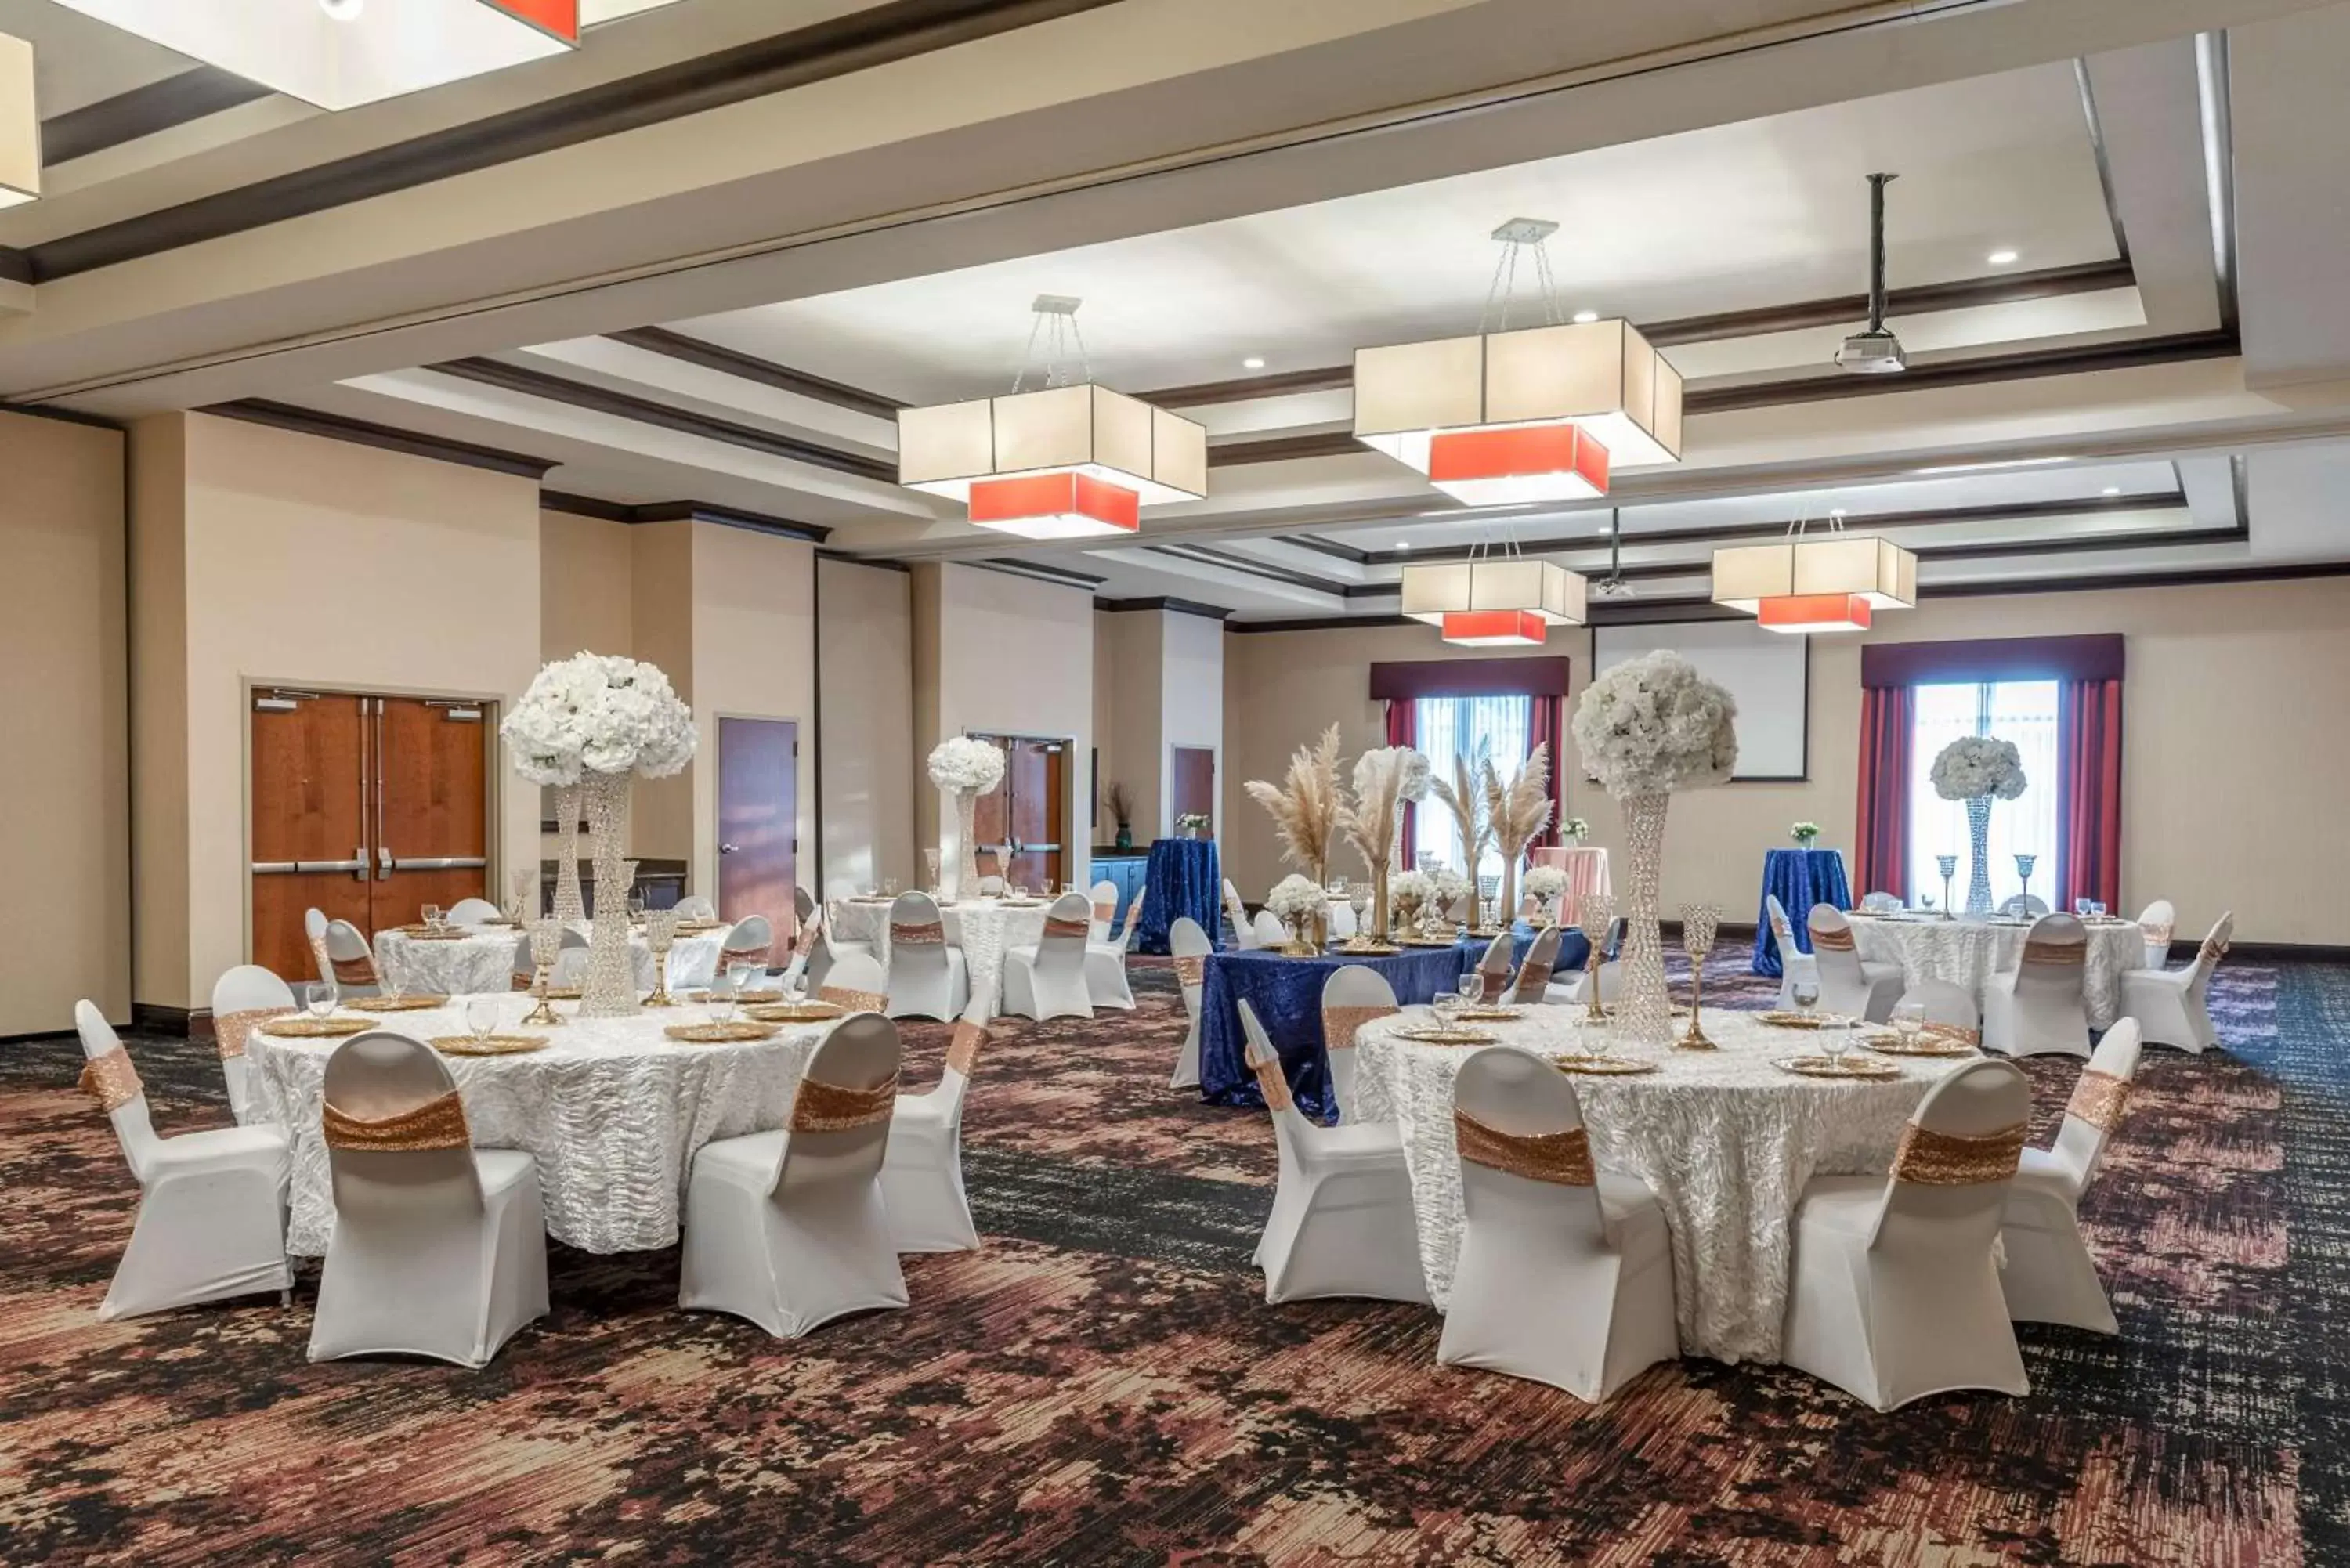 Meeting/conference room, Banquet Facilities in Hilton Garden Inn North Little Rock